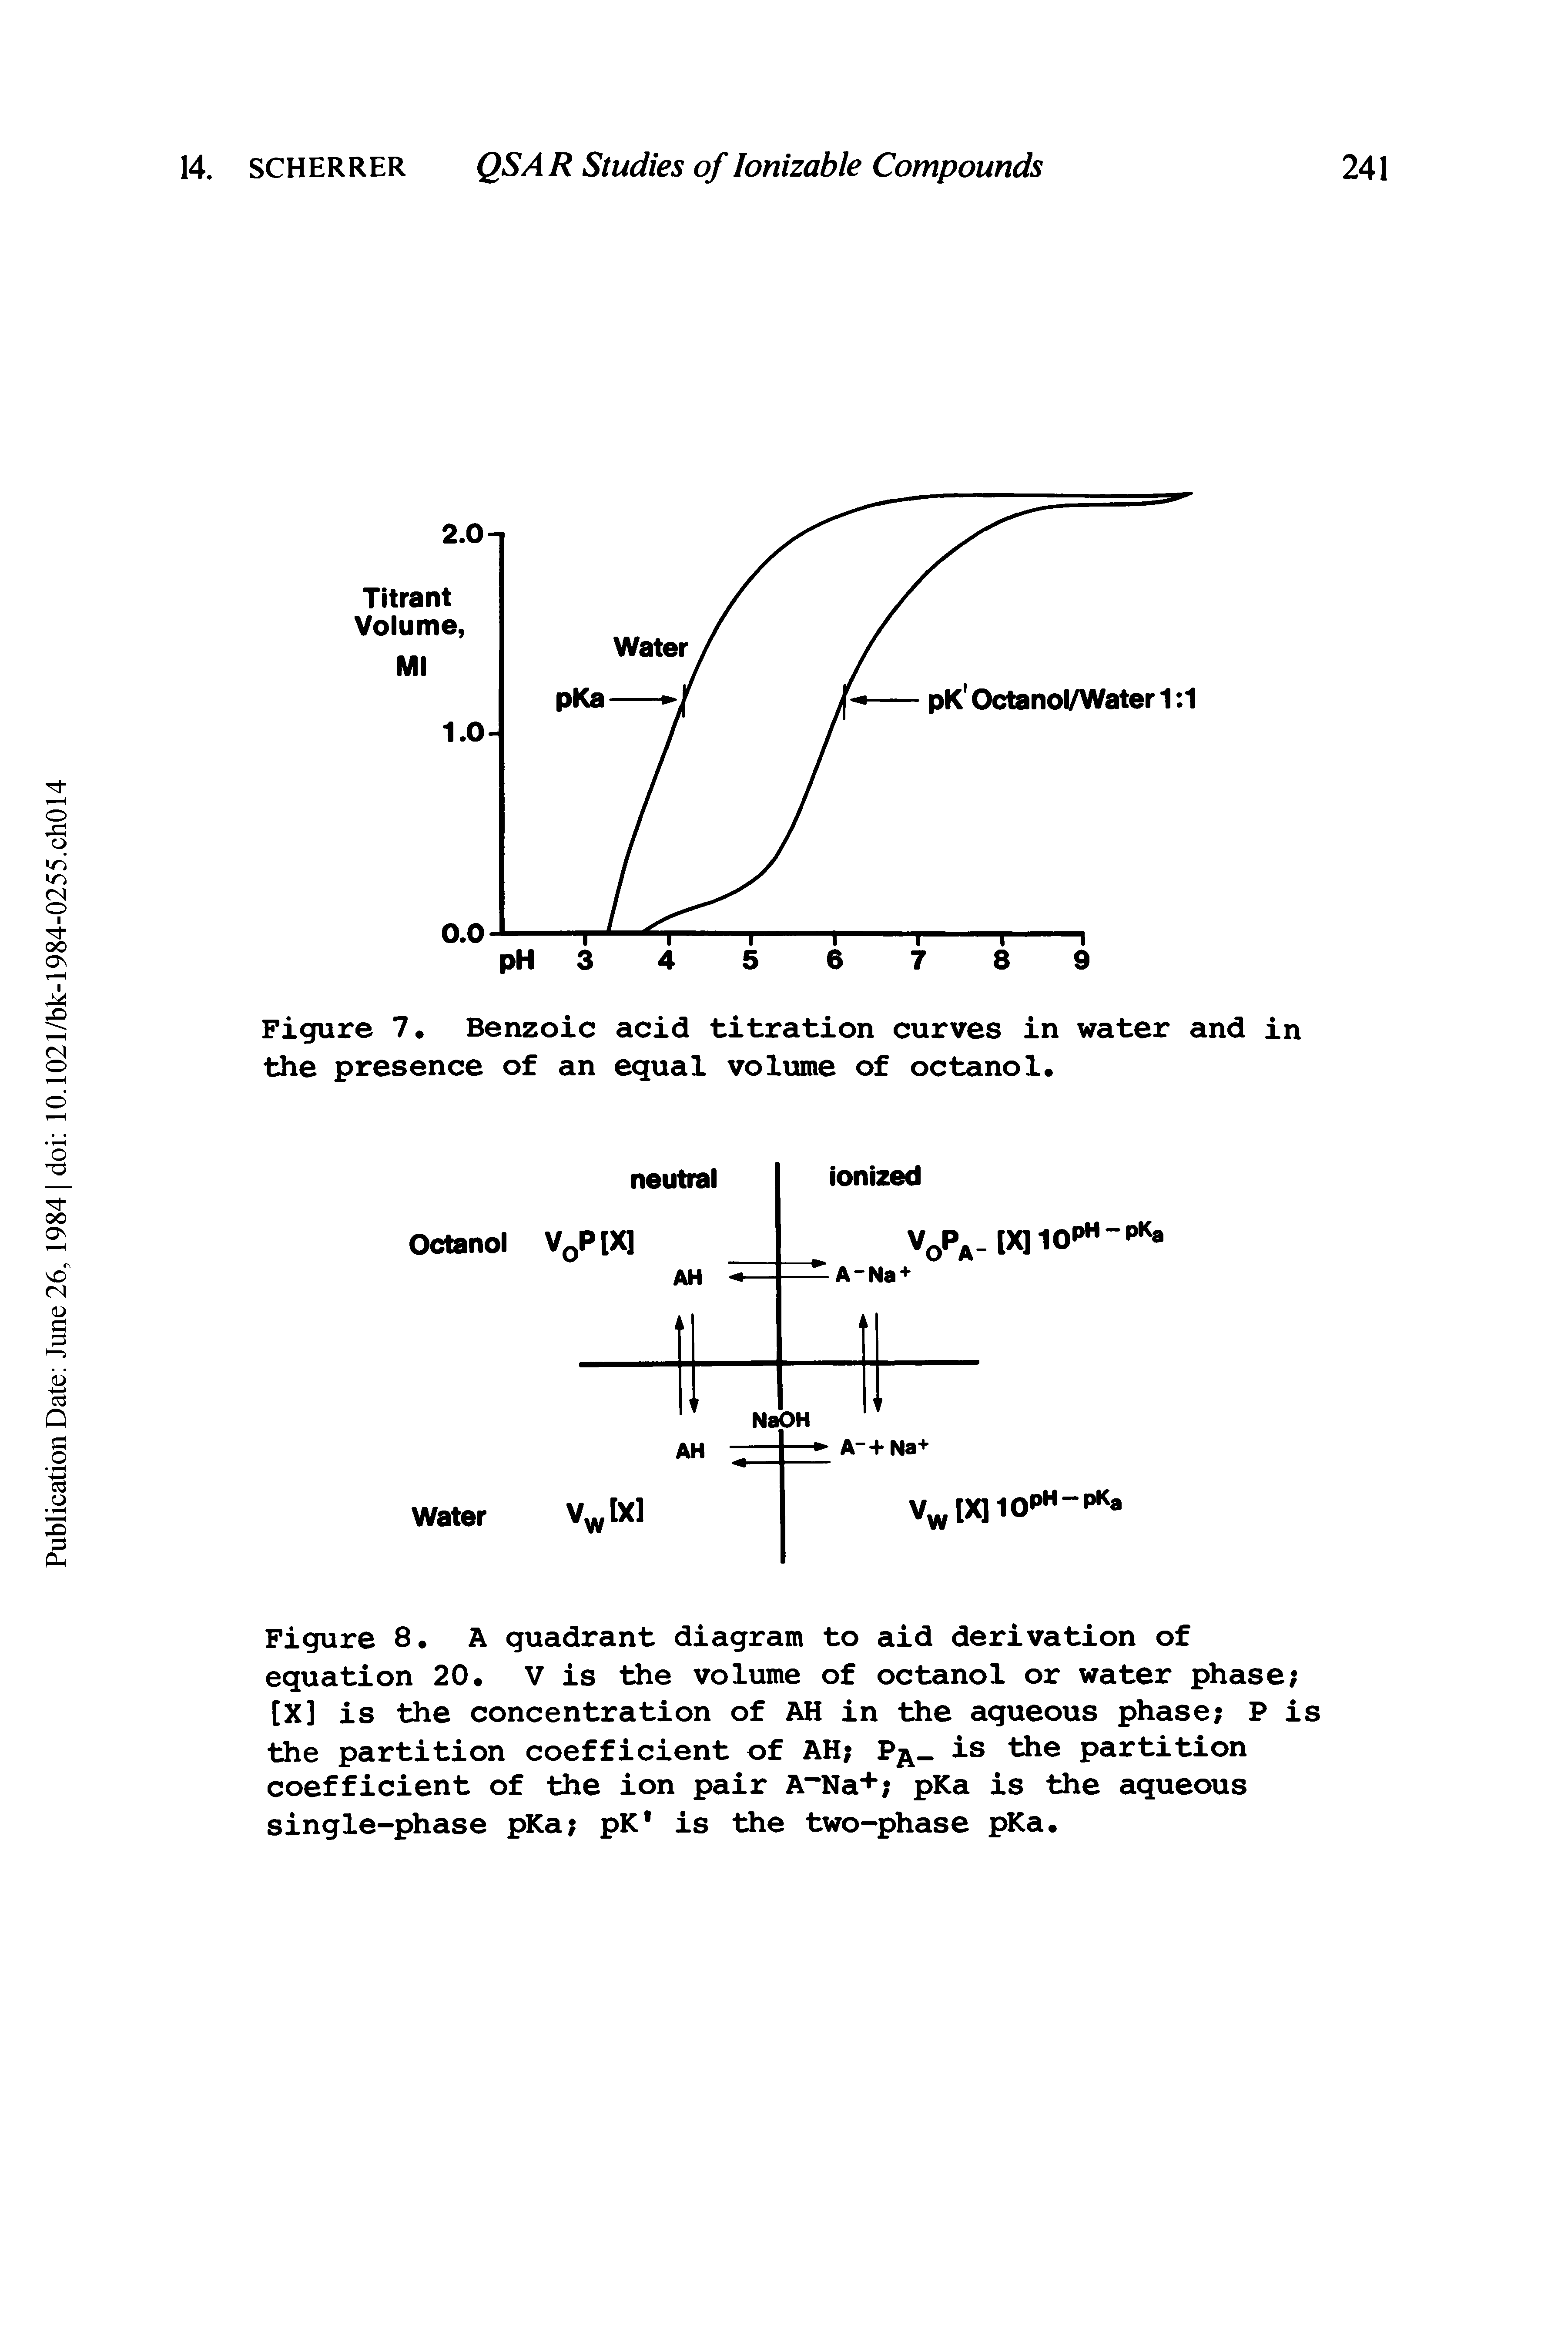 Figure 7. Benzoic acid titration curves in water and in the presence of an equal volume of octanol.